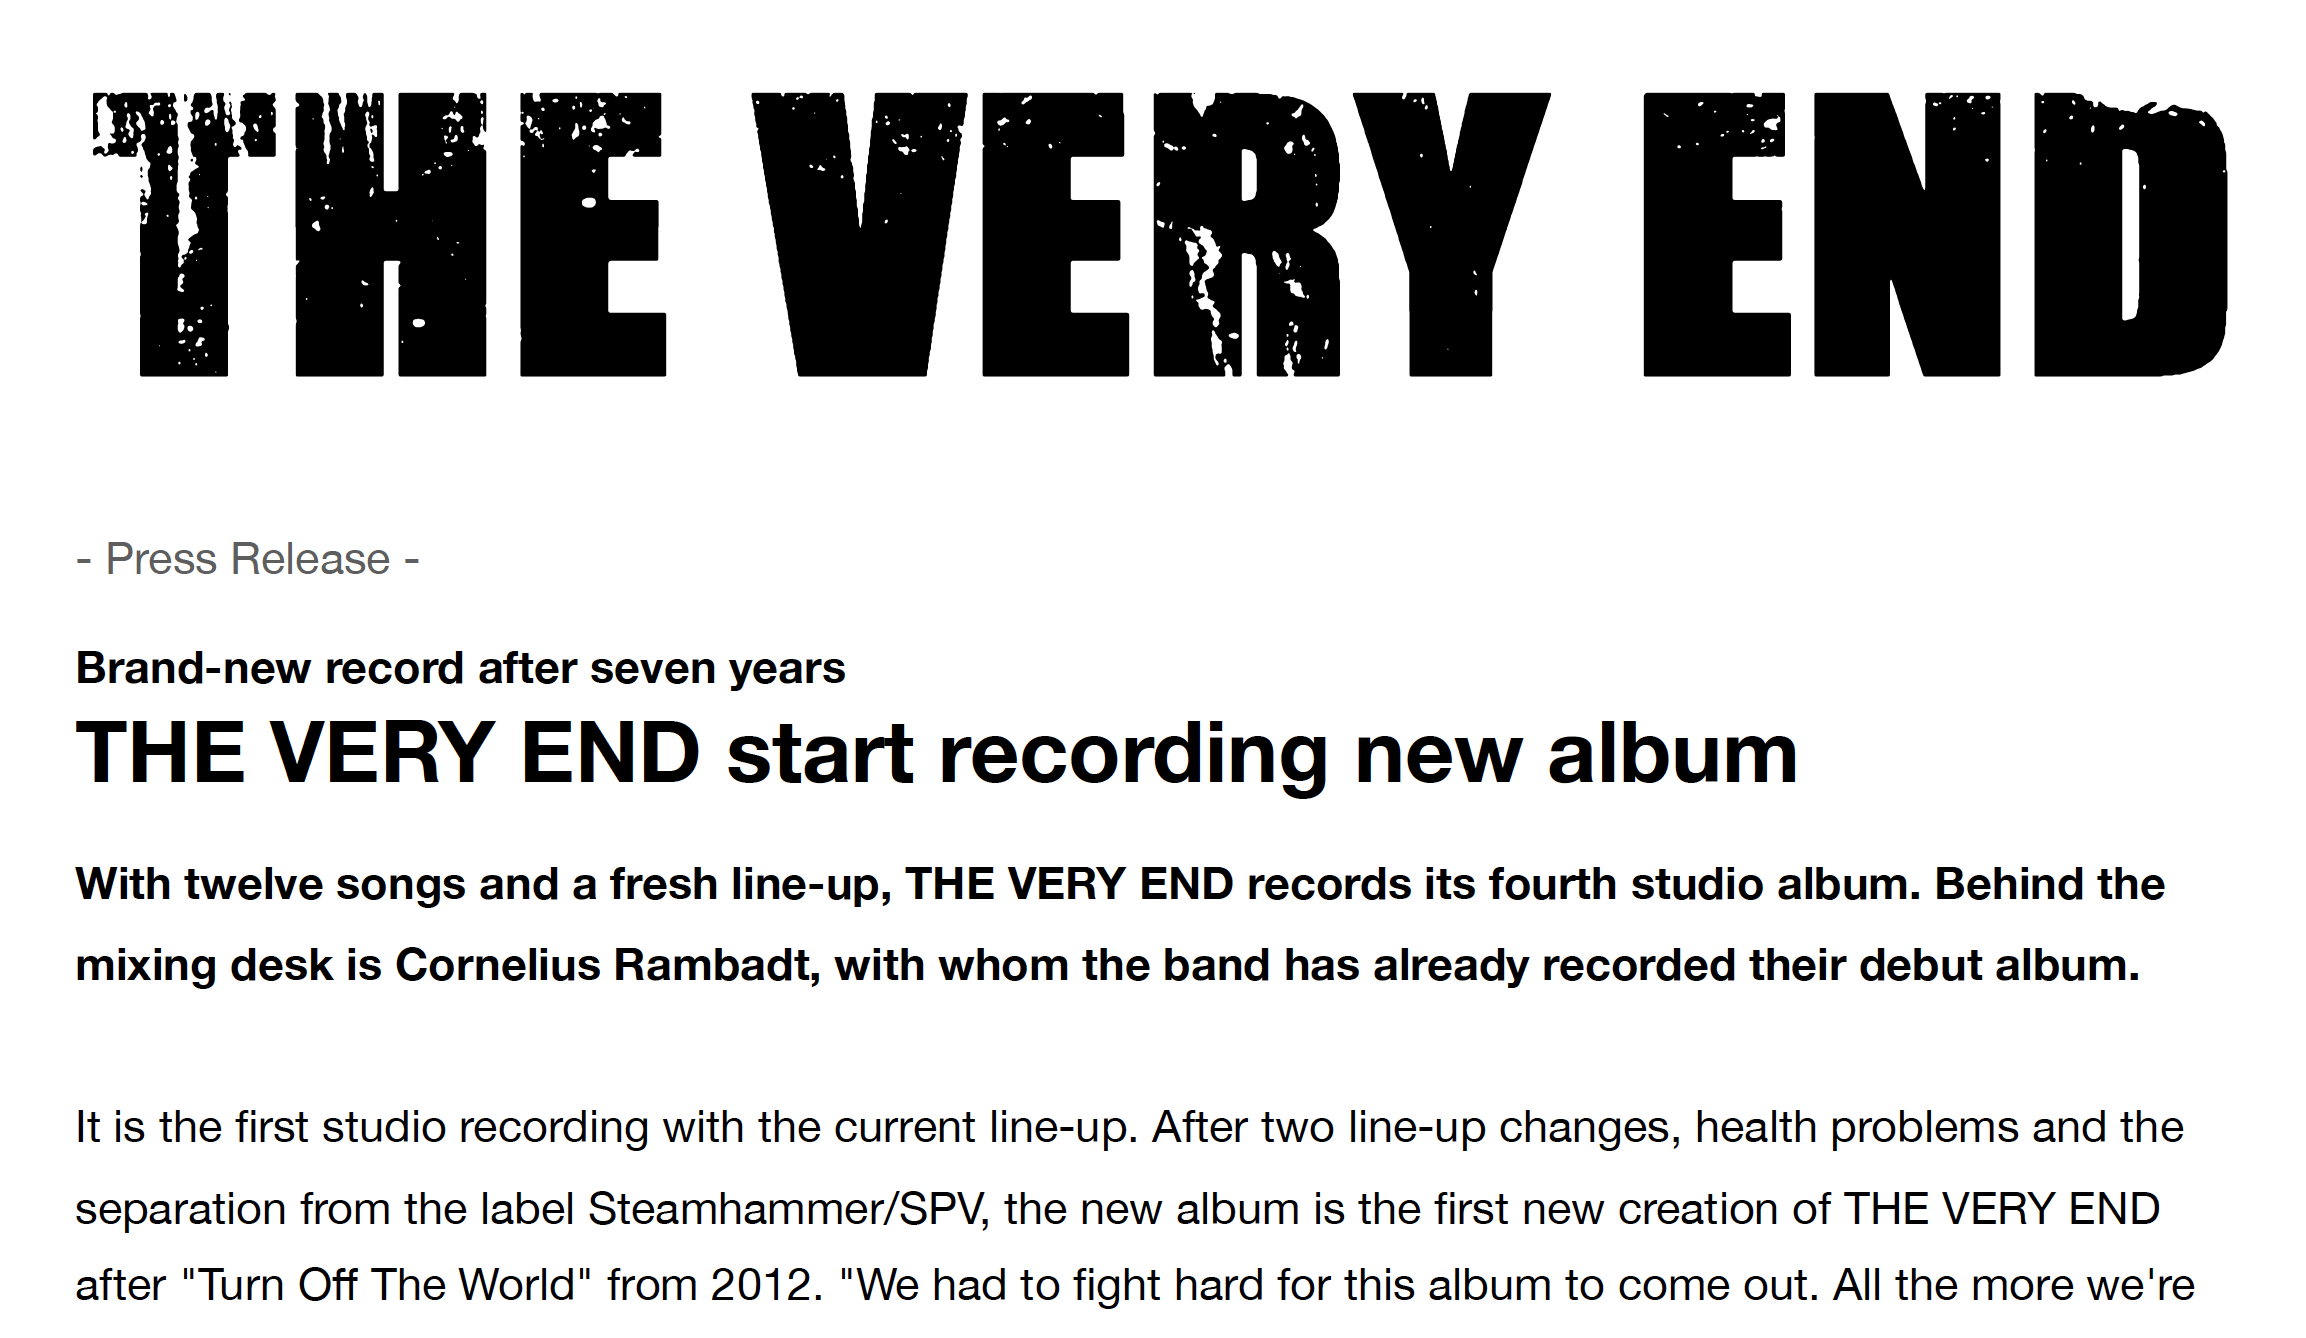 ENGLISH: The Very End start recording new album - press release